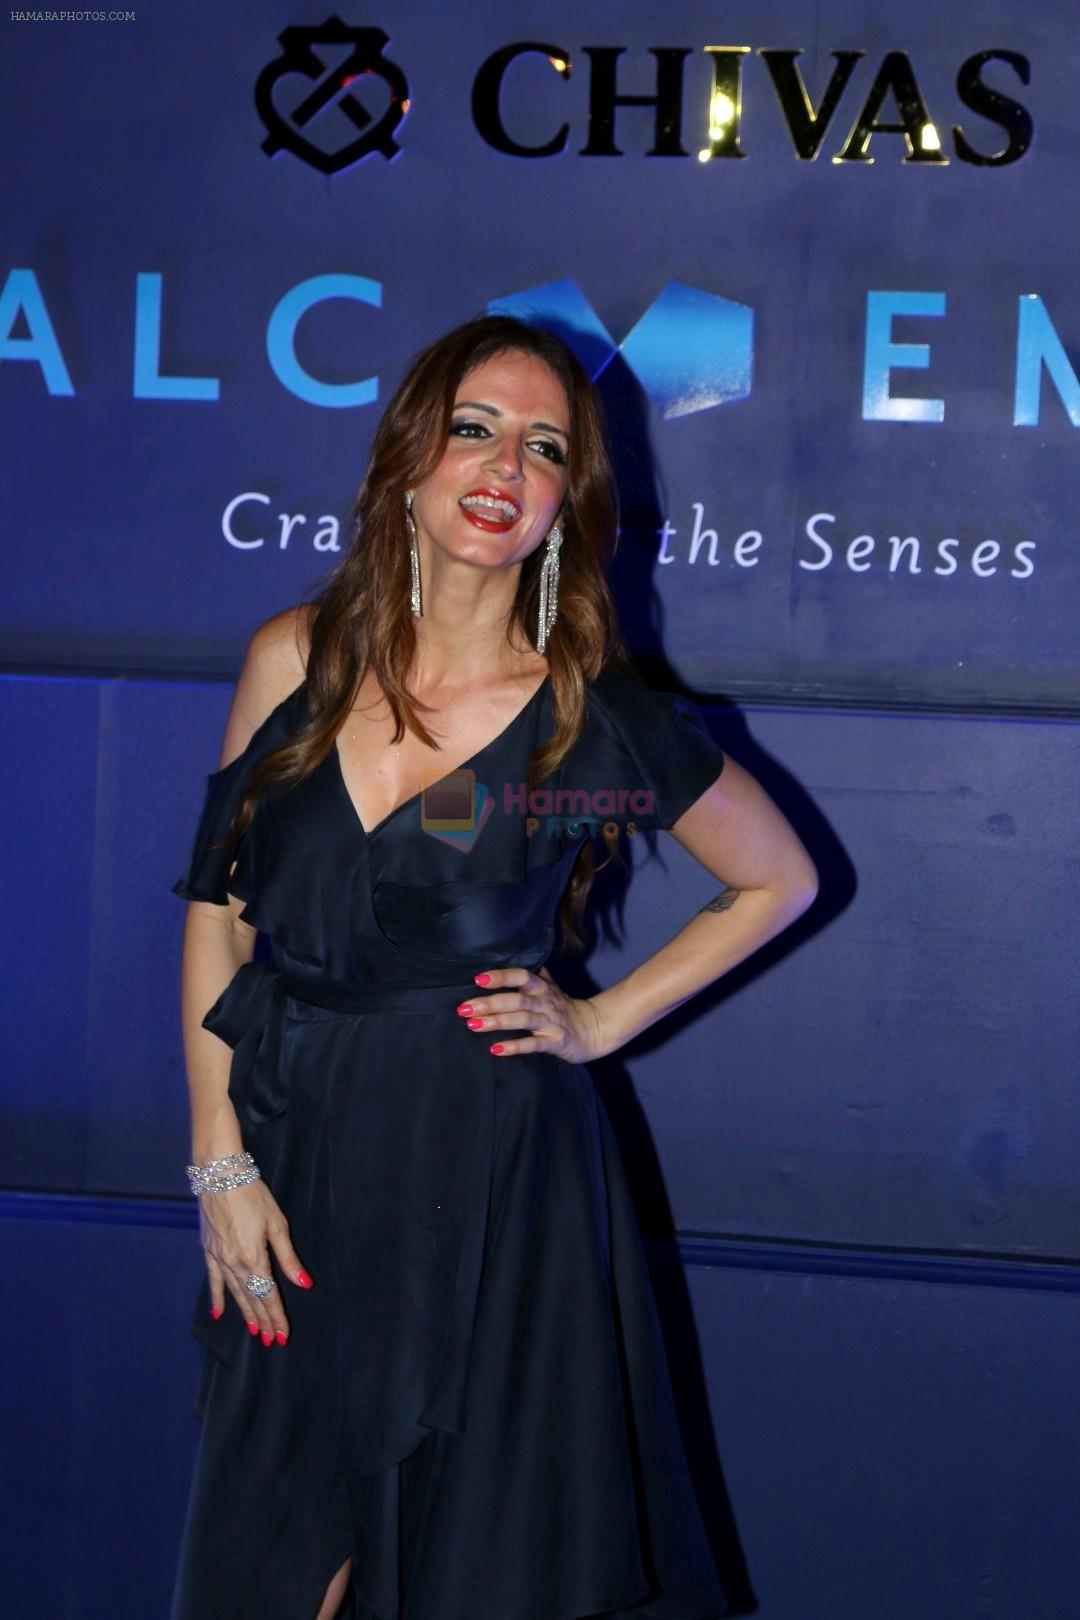 Suzanne Khan at Chivas Regal 18 Alchemy-Crafted For The Senses on 25th March 2017